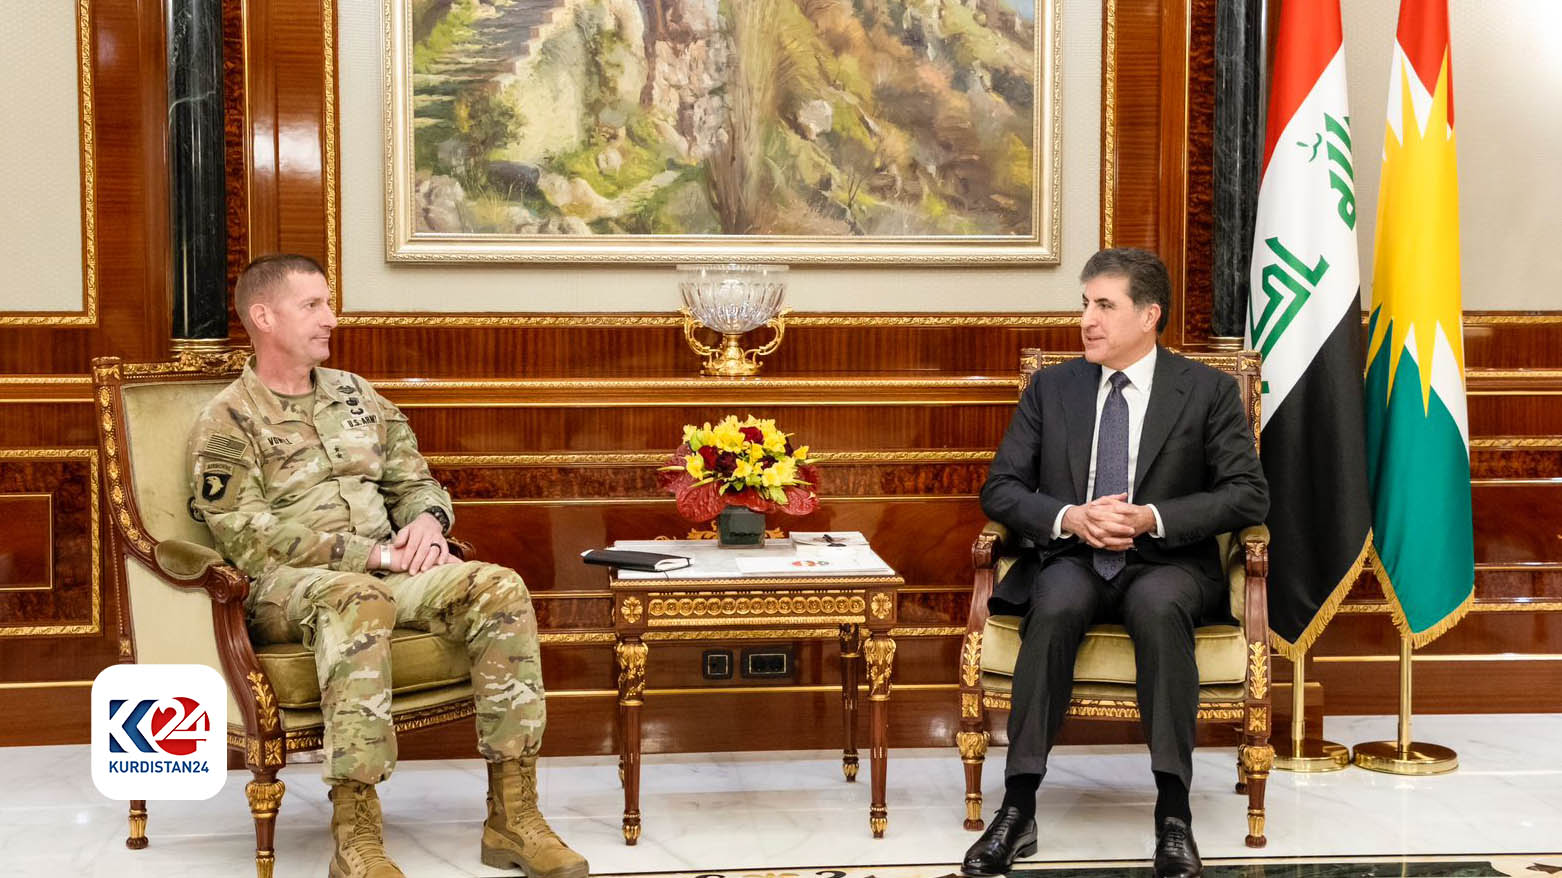 KRG President Nechirvan Barzani (R) met with the Commander of the Allied Forces in Iraq and Syria, Major General Joel Vowell (L). (Photo: Kurdistan 24)